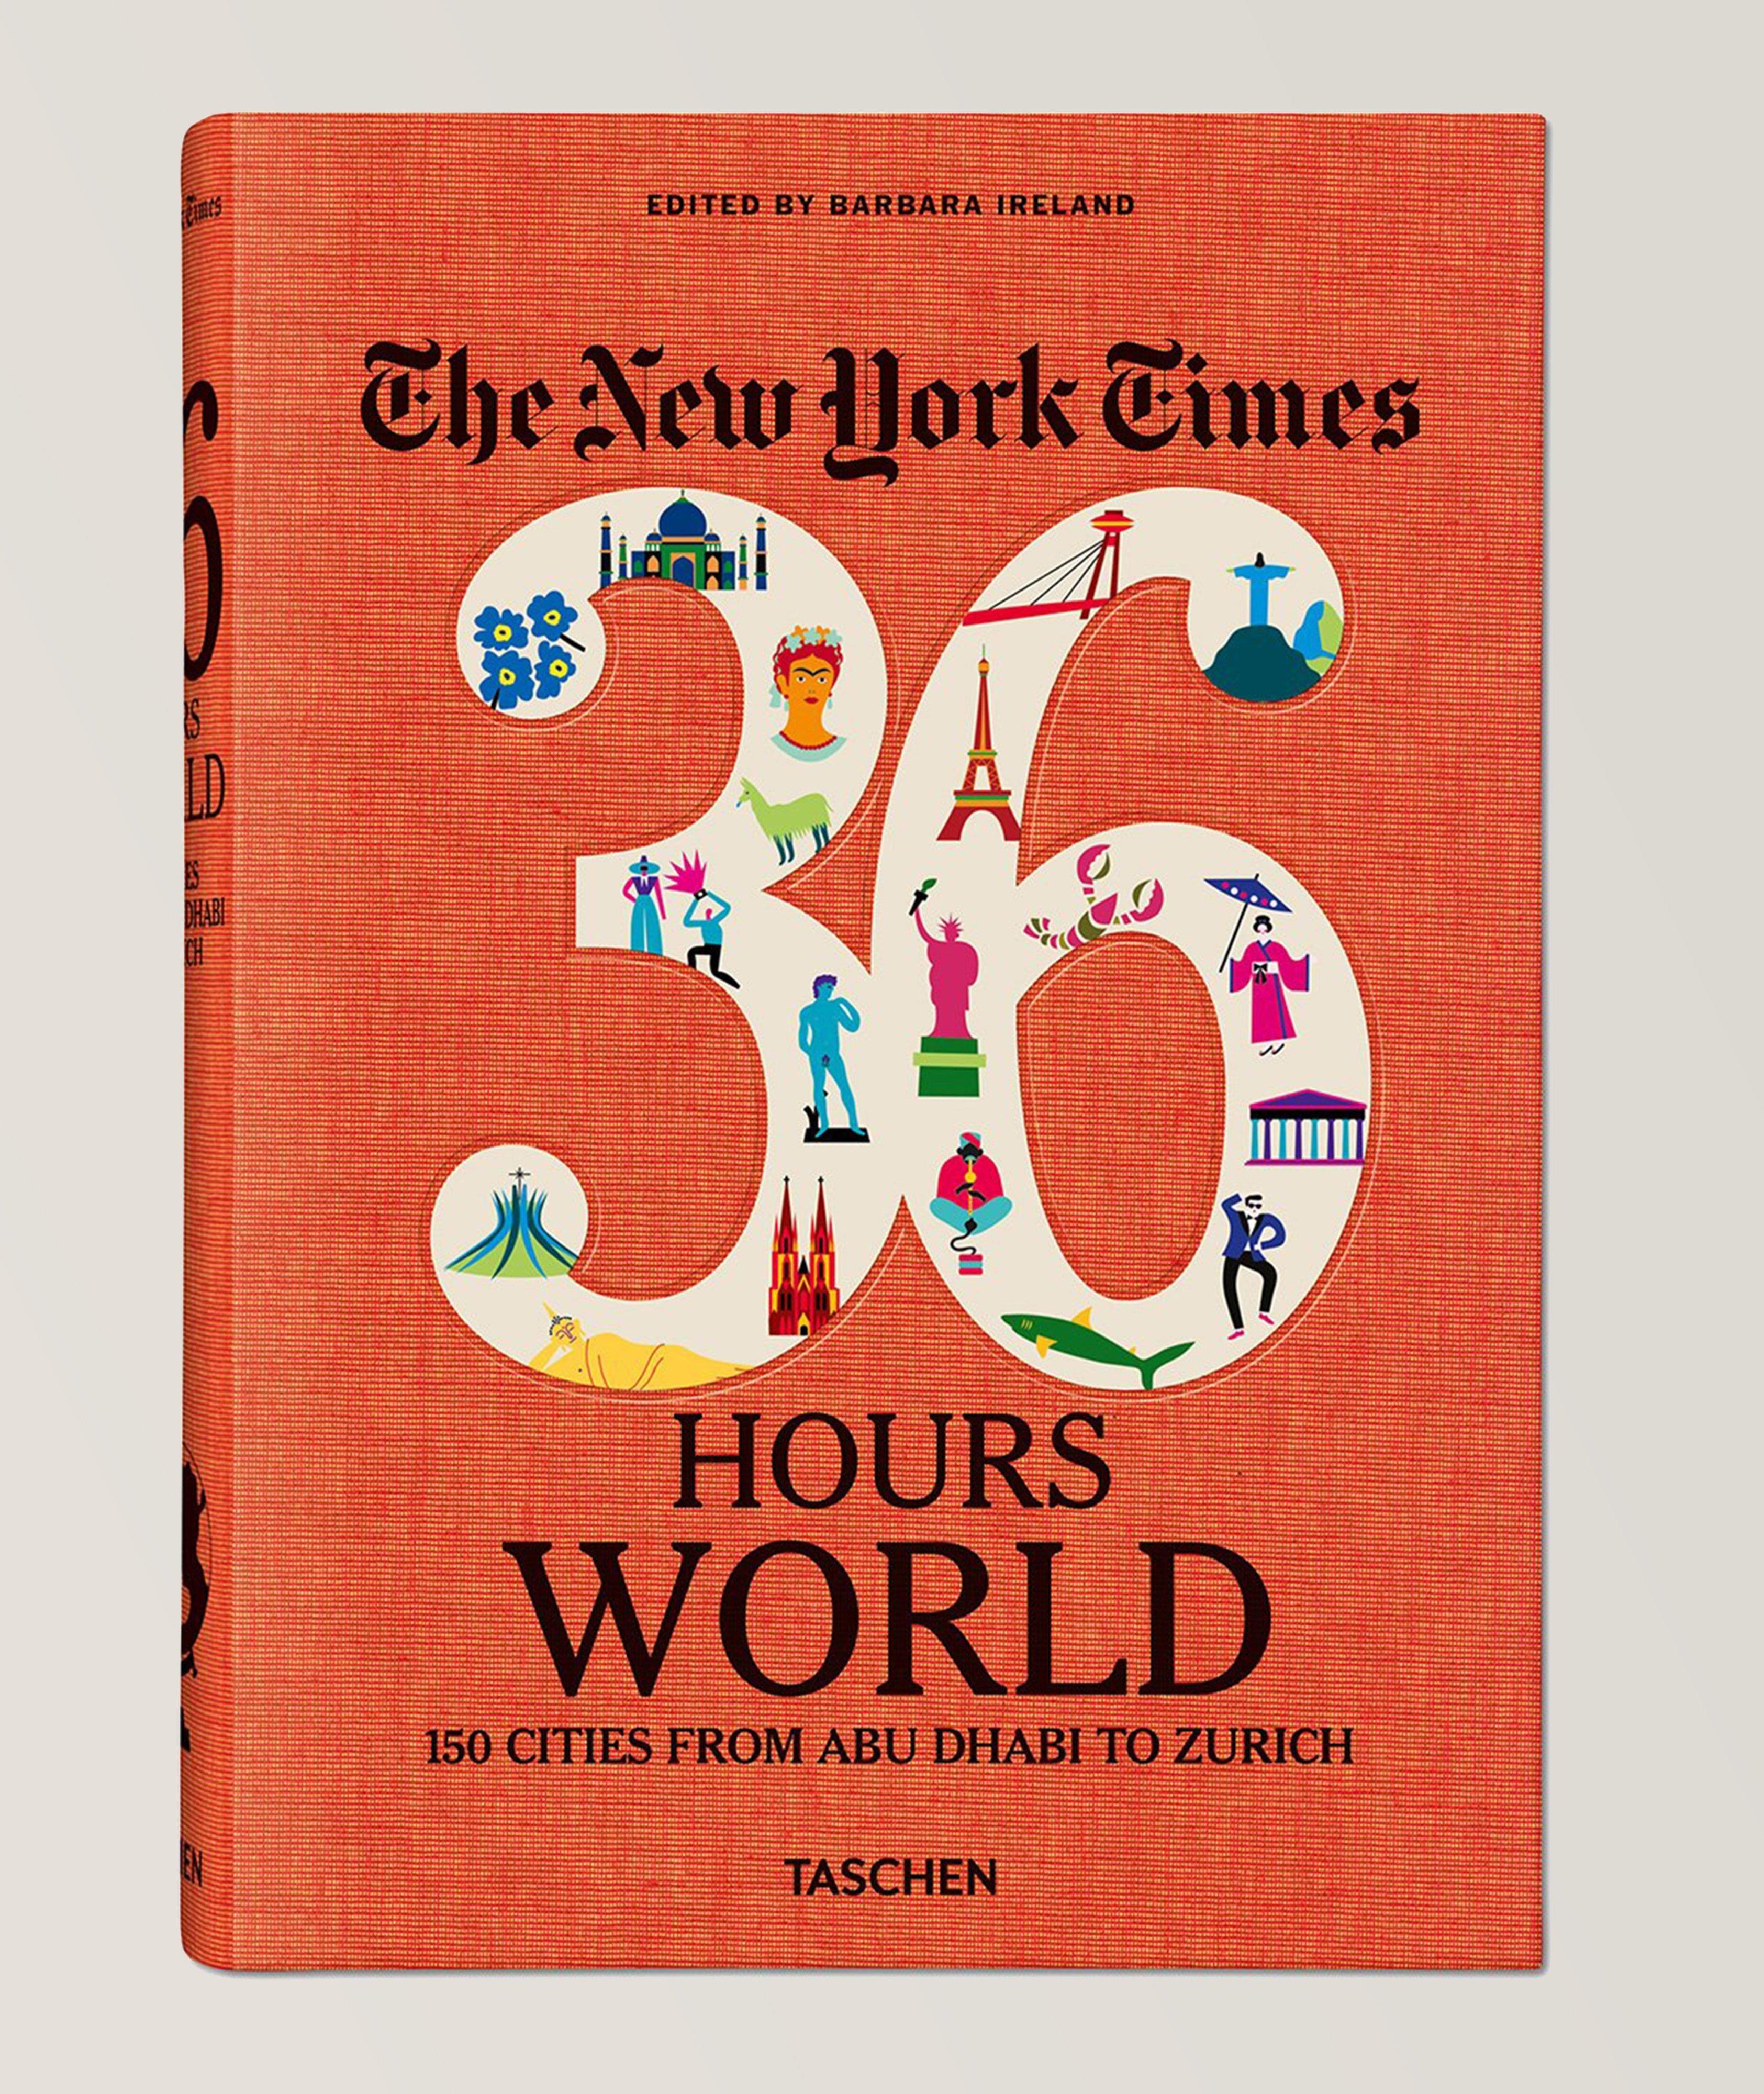 Livre « The New York Times : 36 Hours World » image 0